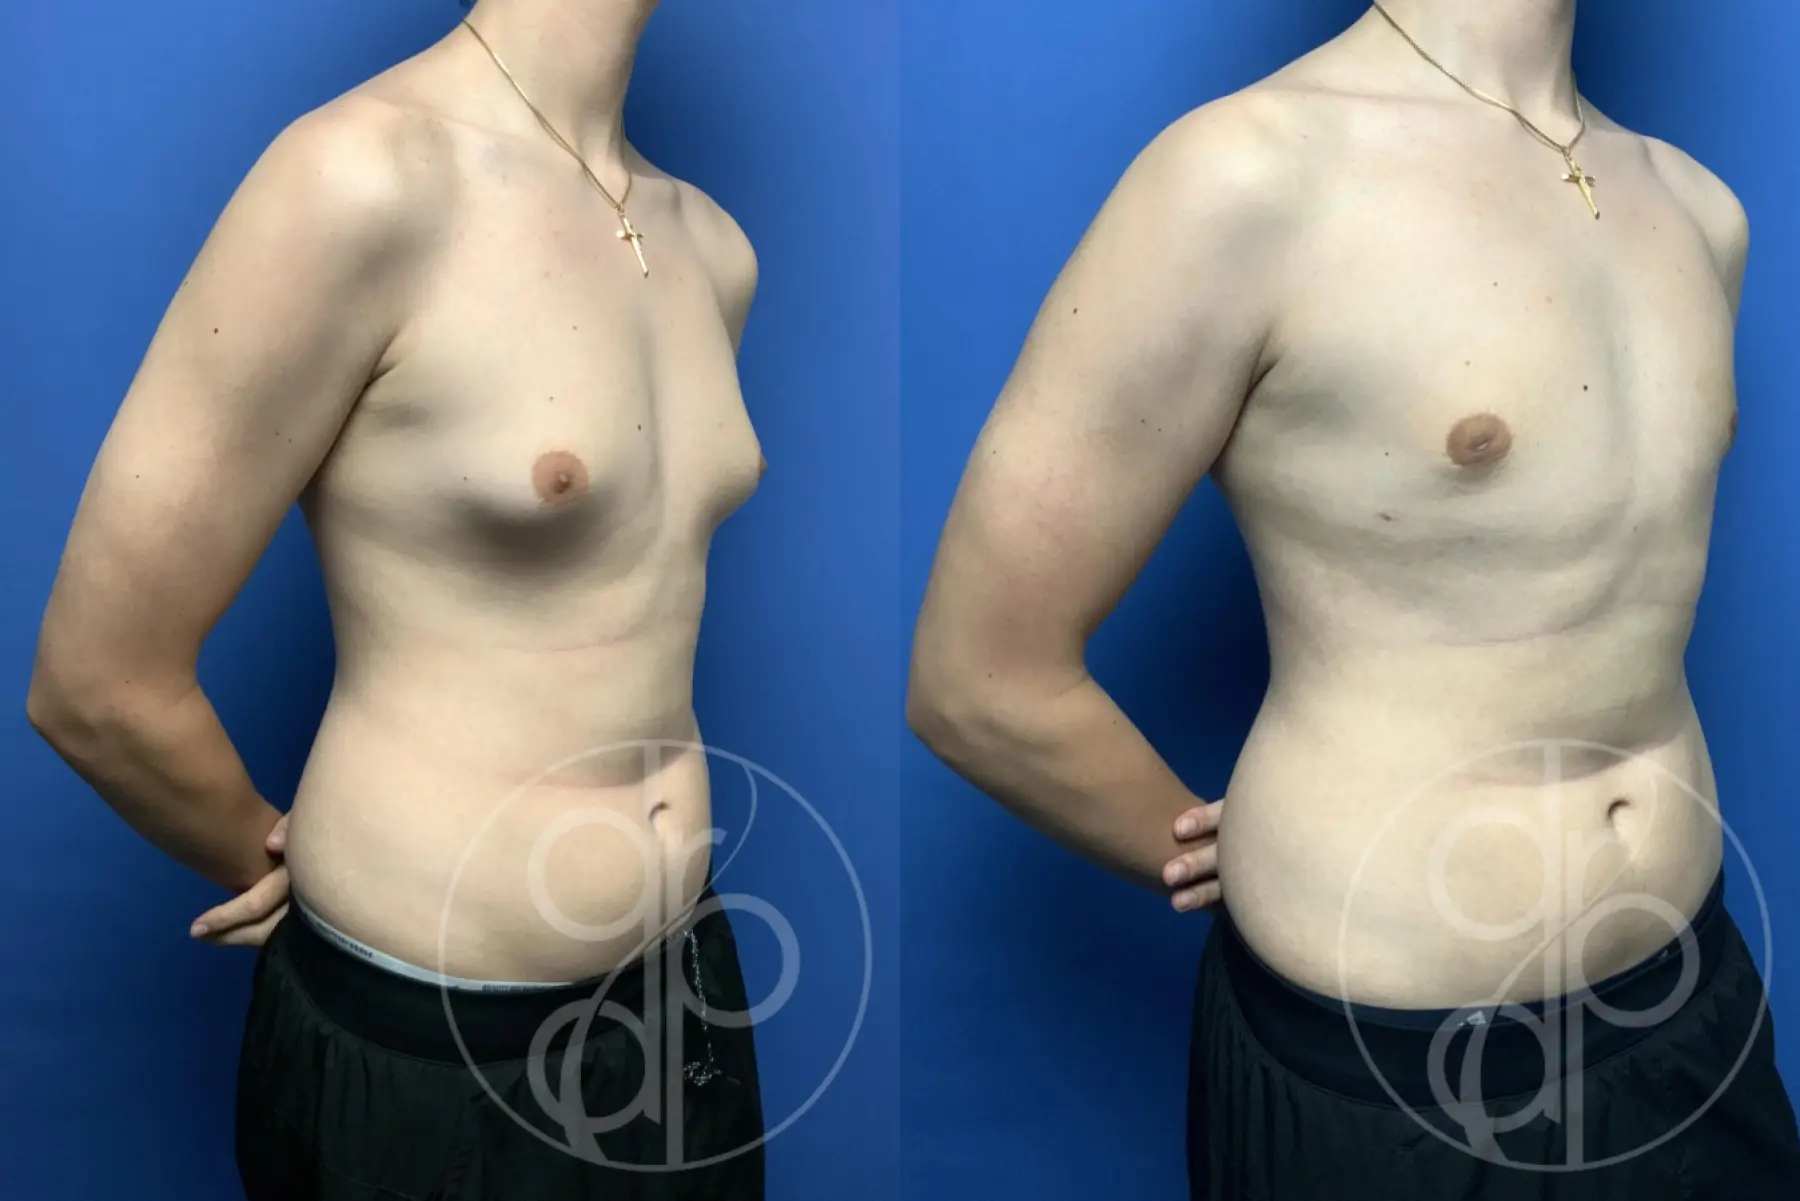 gynecomastia before and after result - Before and After 2